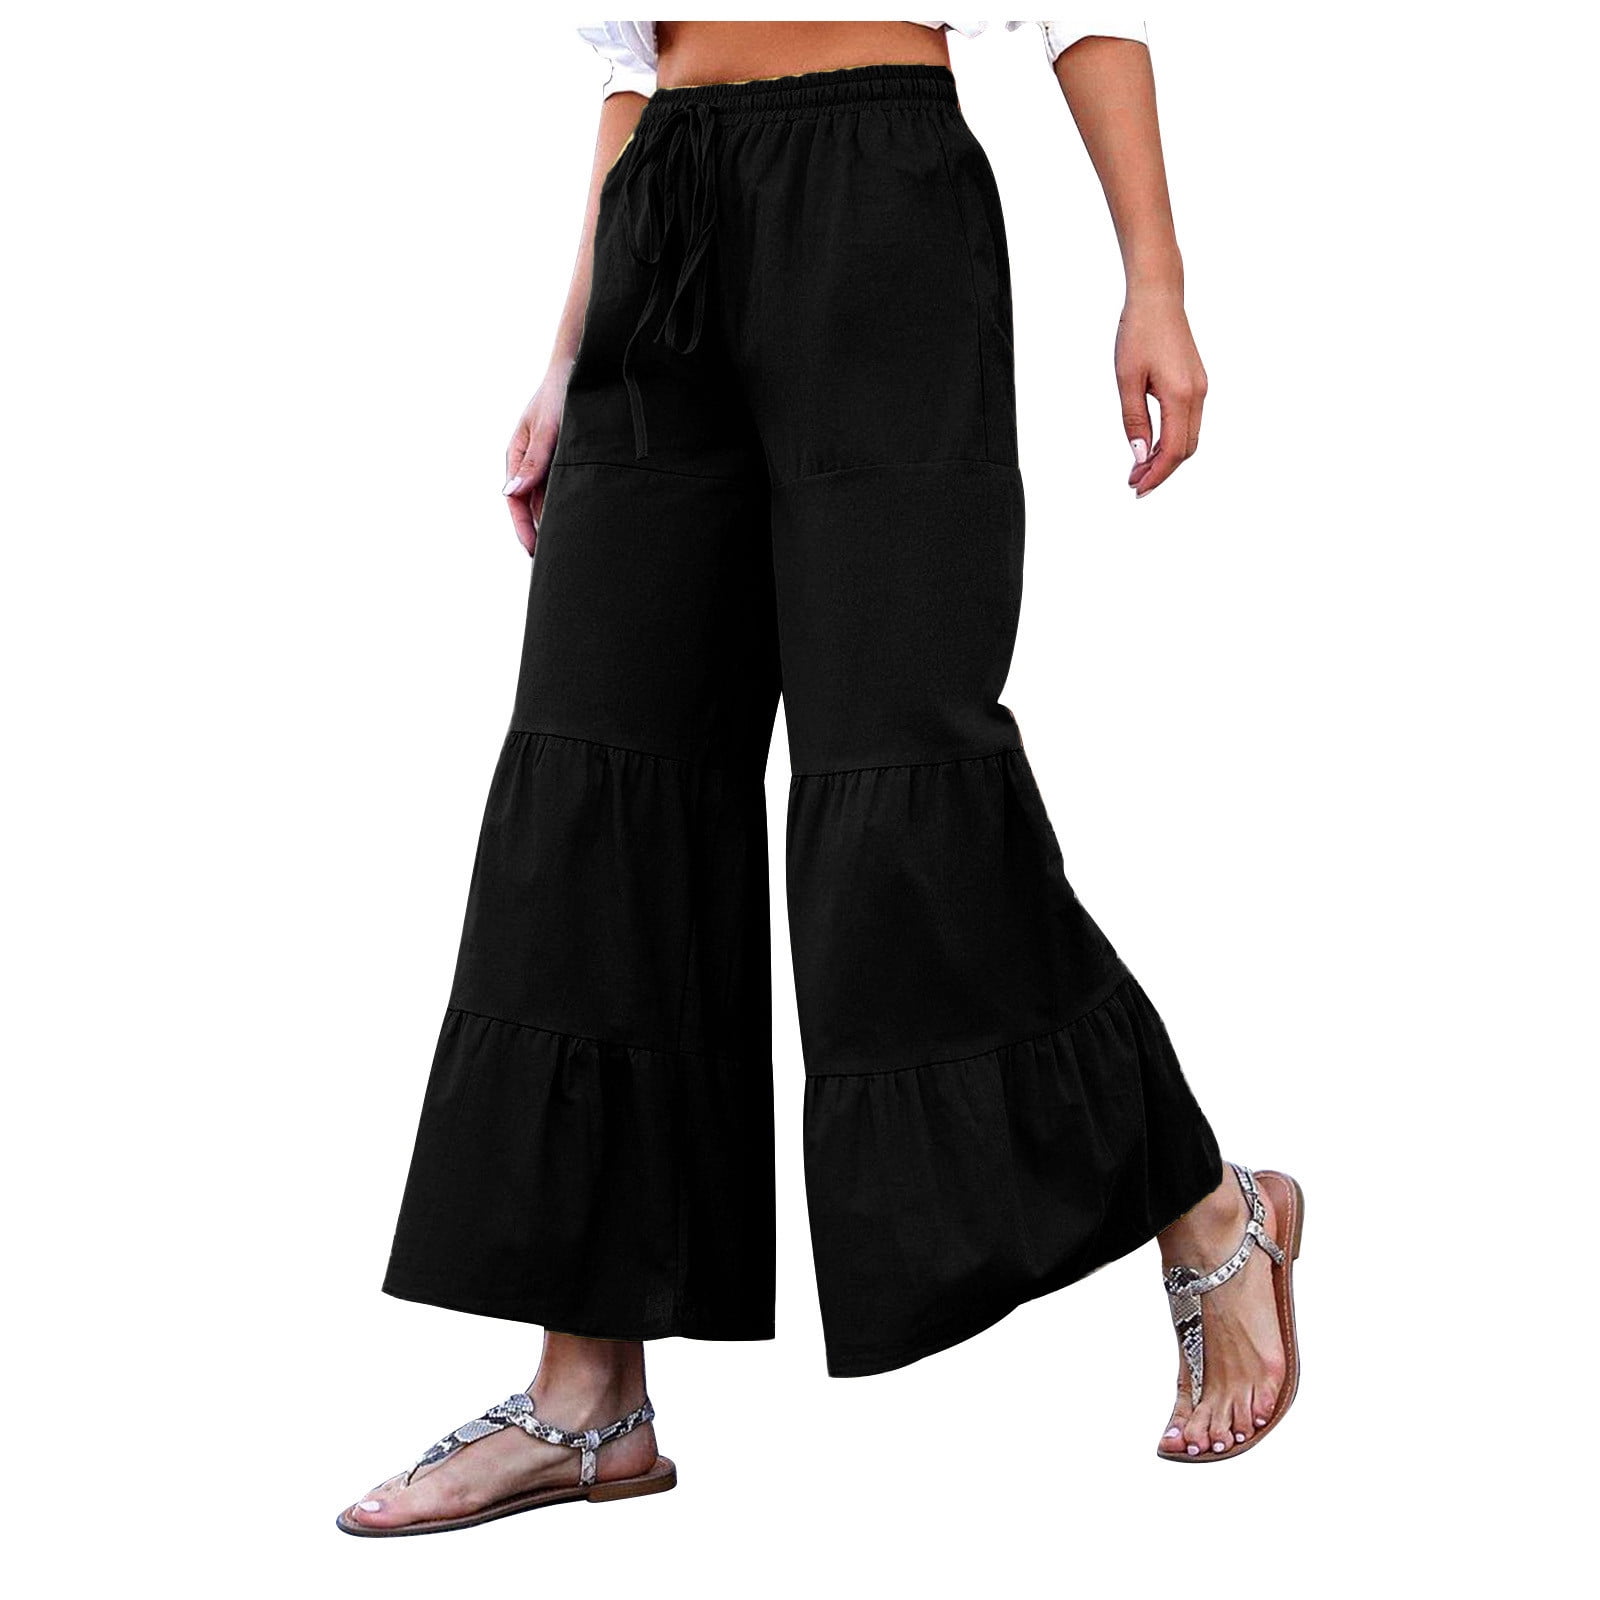 Bigersell Women Stretch Juniors Pants Full Length Women Casual Solid Pants  Comfortable Elastic High Waist Wide Leg Casual Loose Beach Pants Tights for Ladies  Leggings 